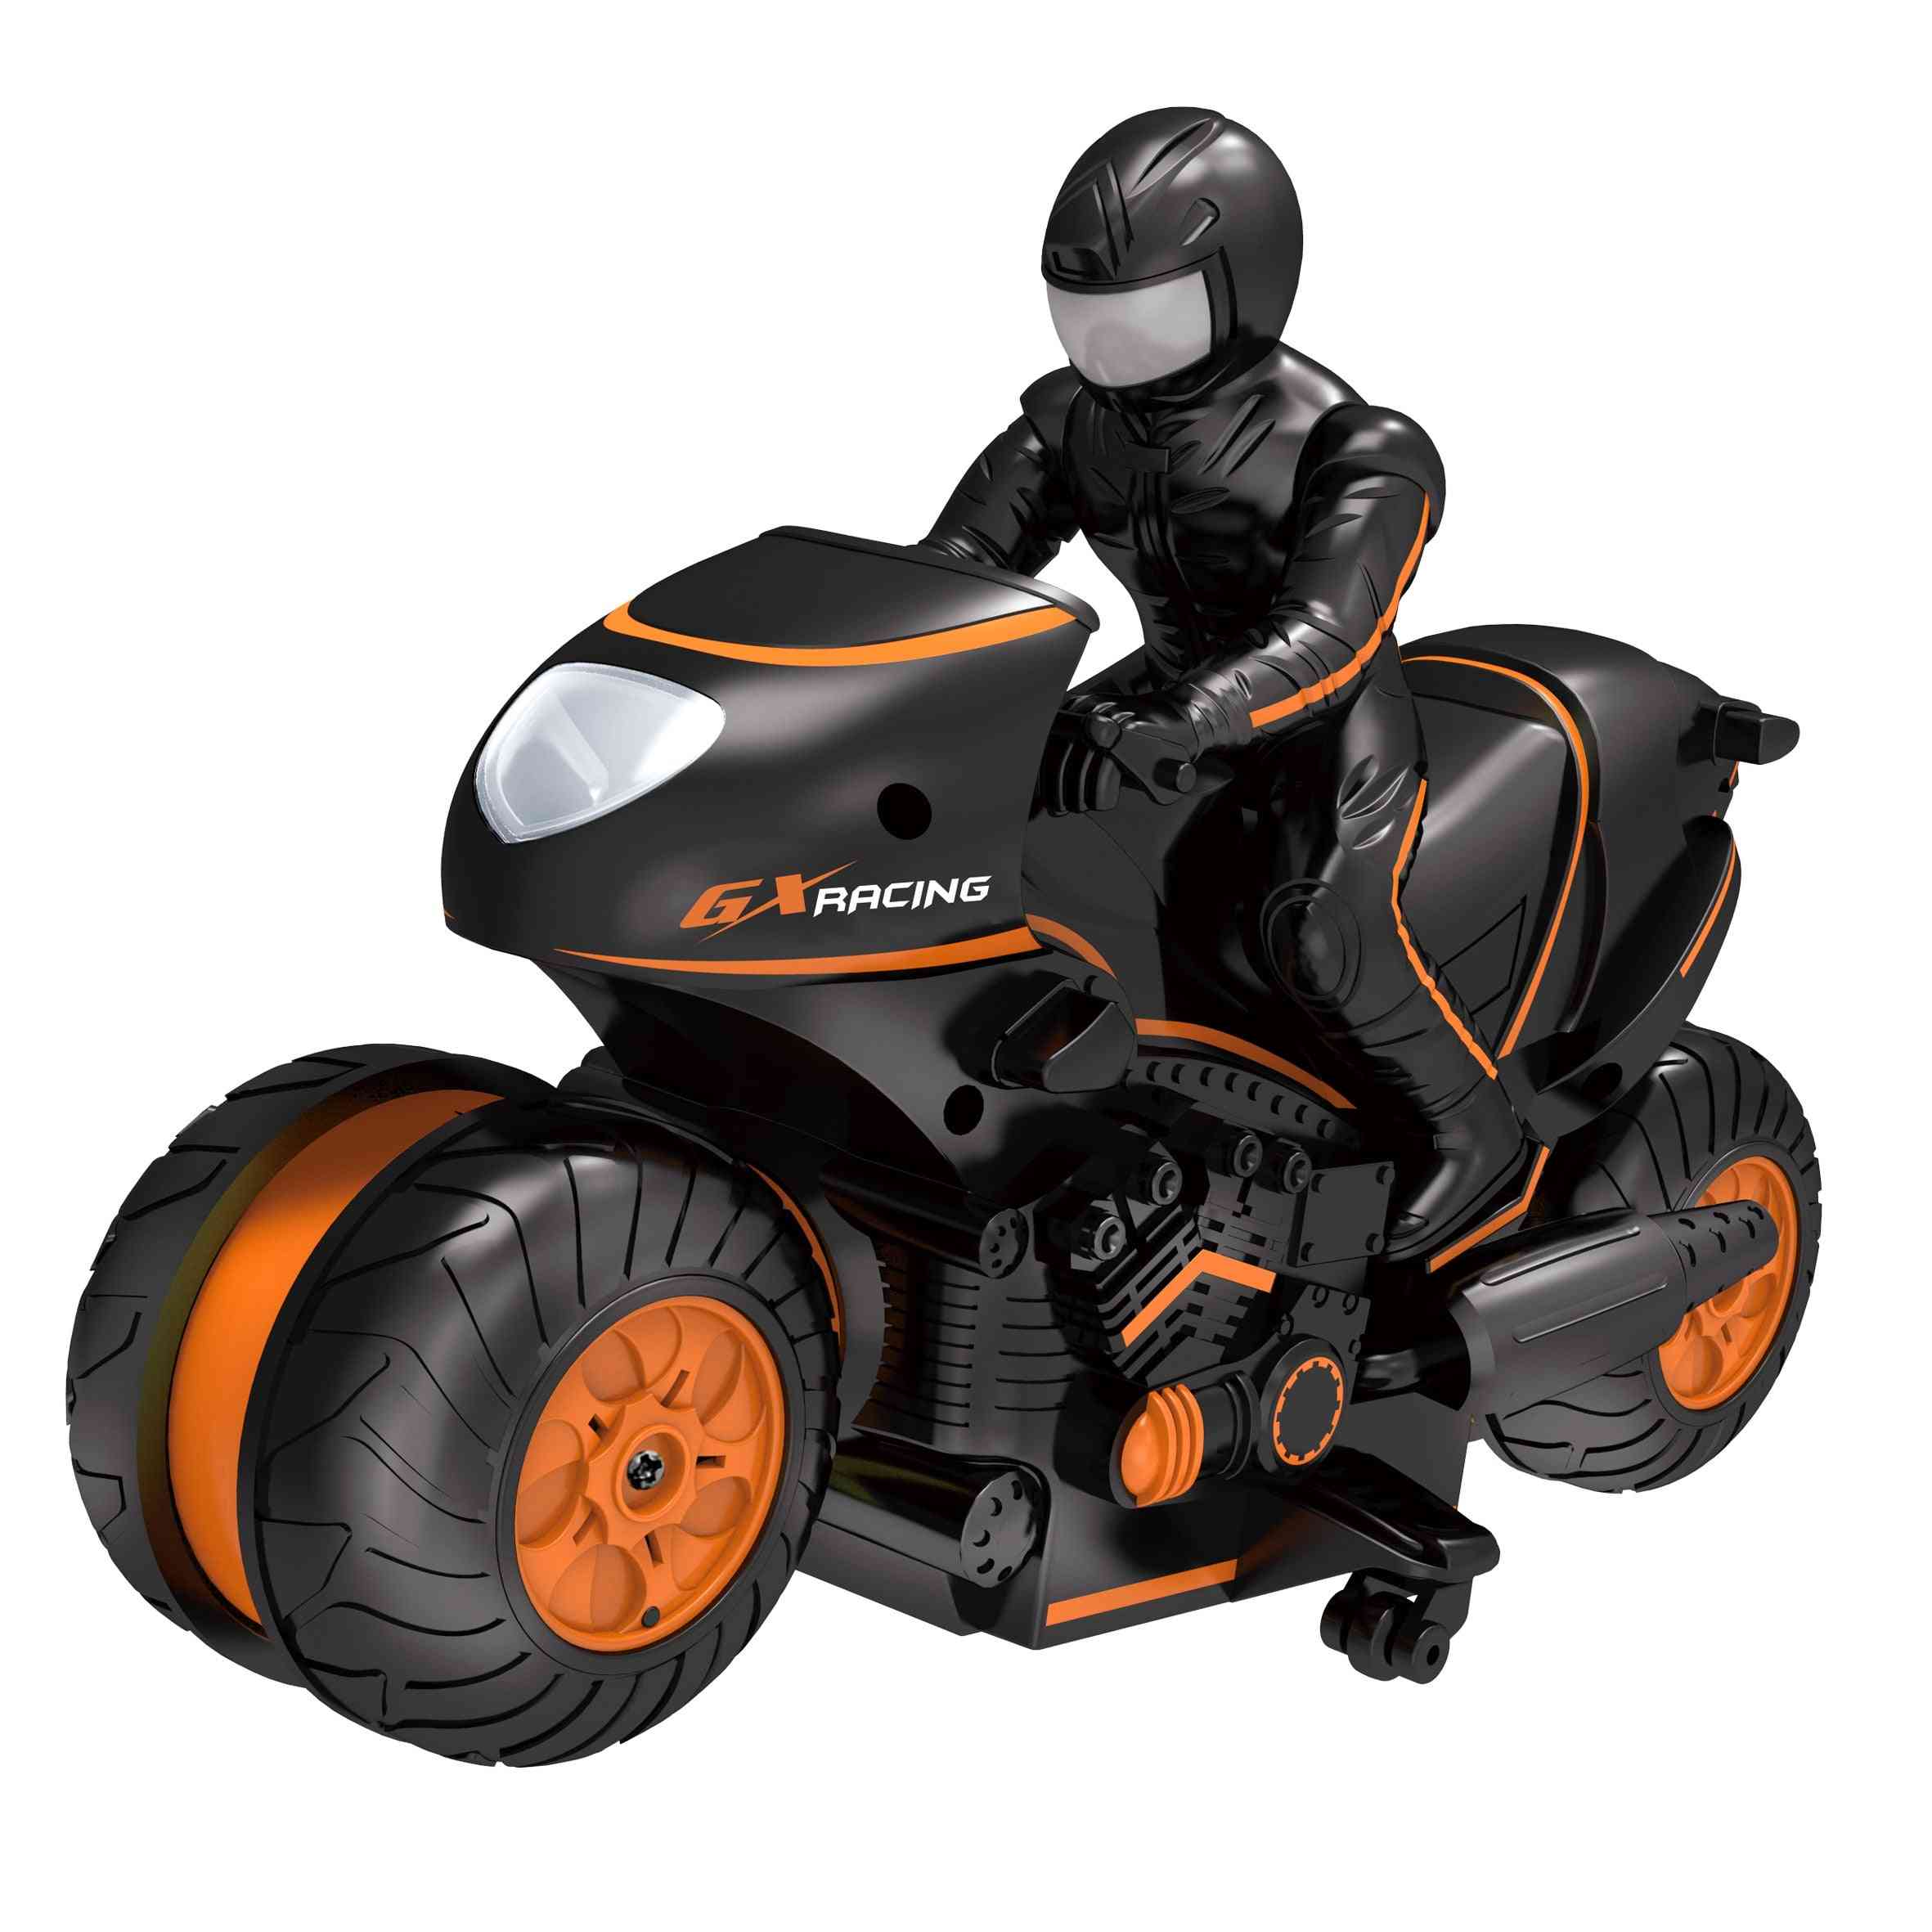 Premote Control Mini Motorcycle-2.4 Ghz  High Speed For